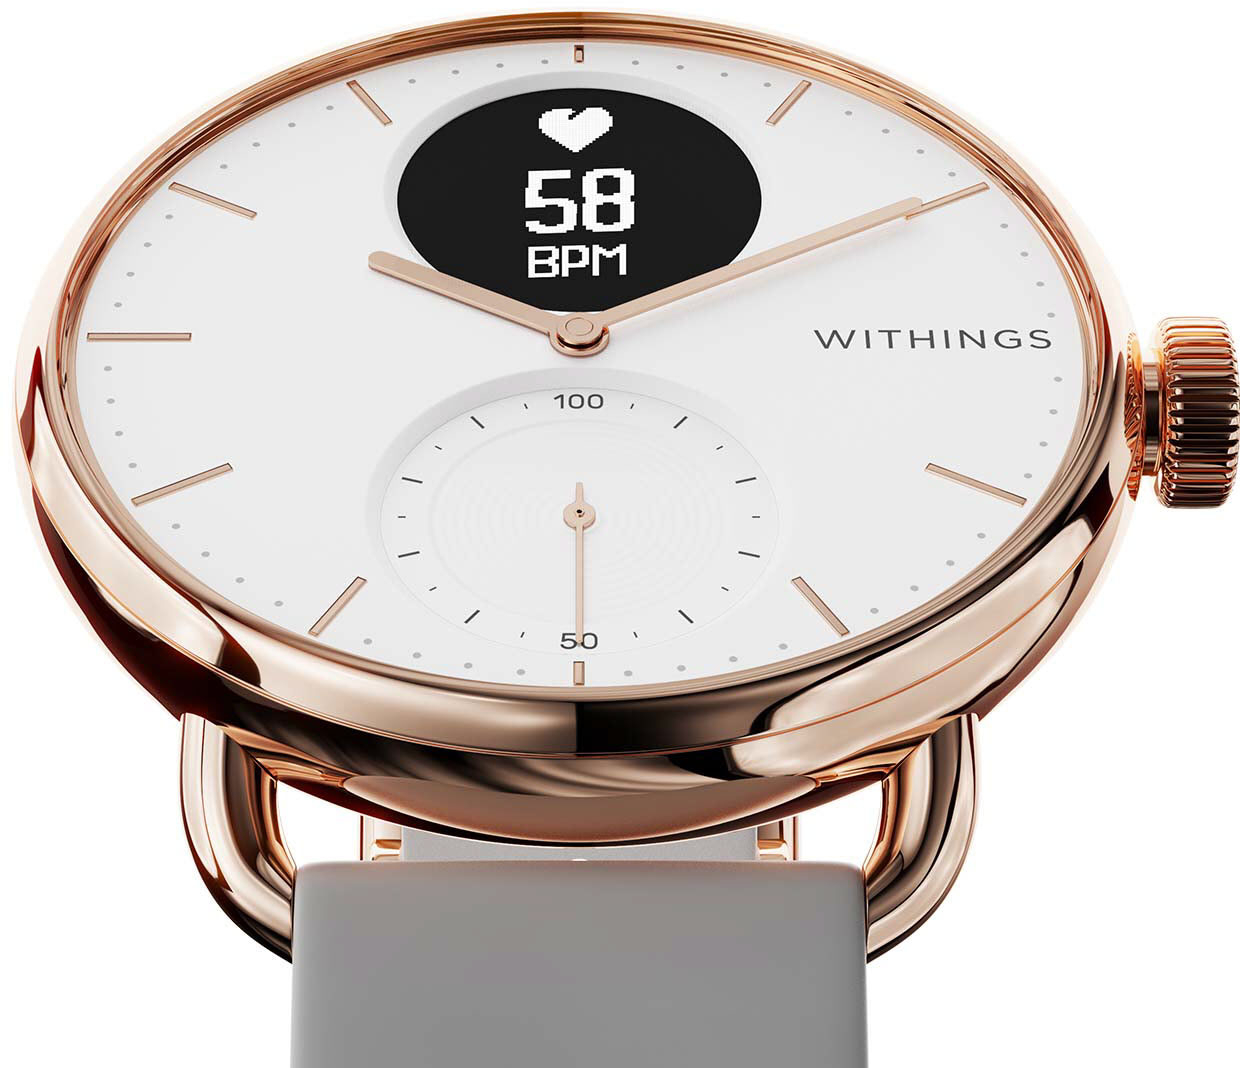 Angle View: Withings - Scanwatch - Hybrid Smartwatch with ECG, heart rate and oximeter - 38mm - White